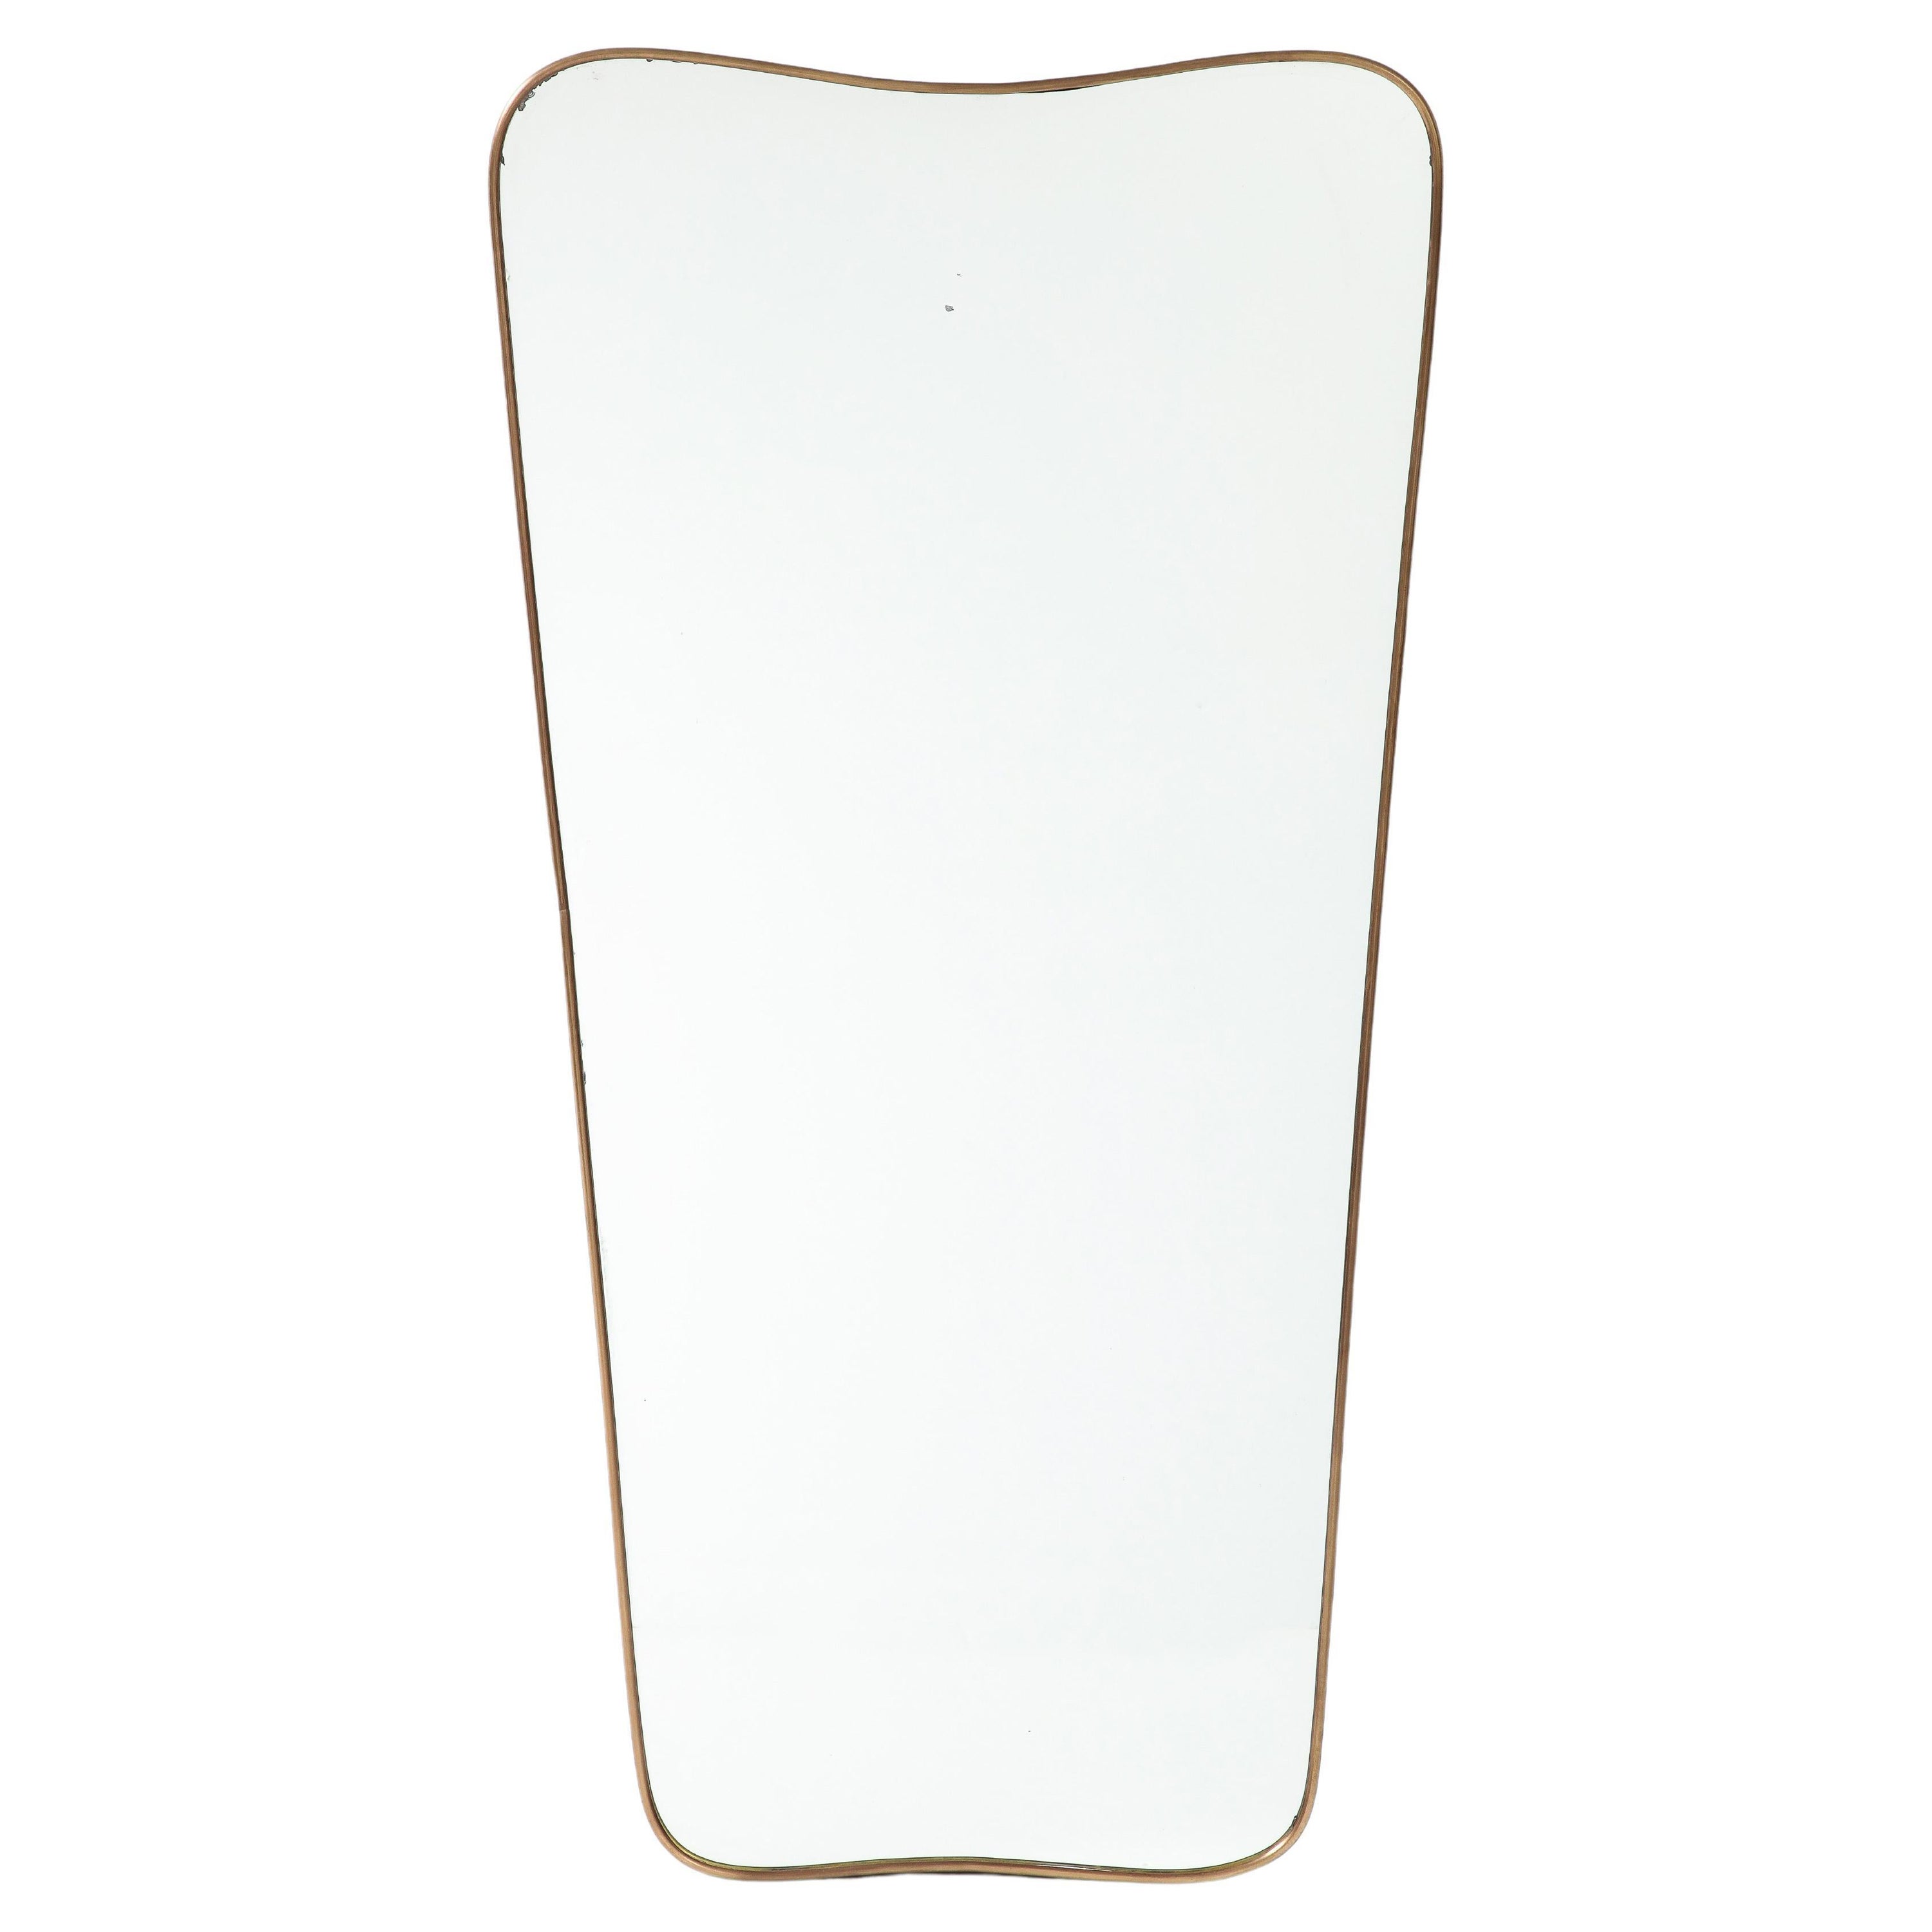 1950s Italian Modernist Large Shaped Brass Mirror For Sale